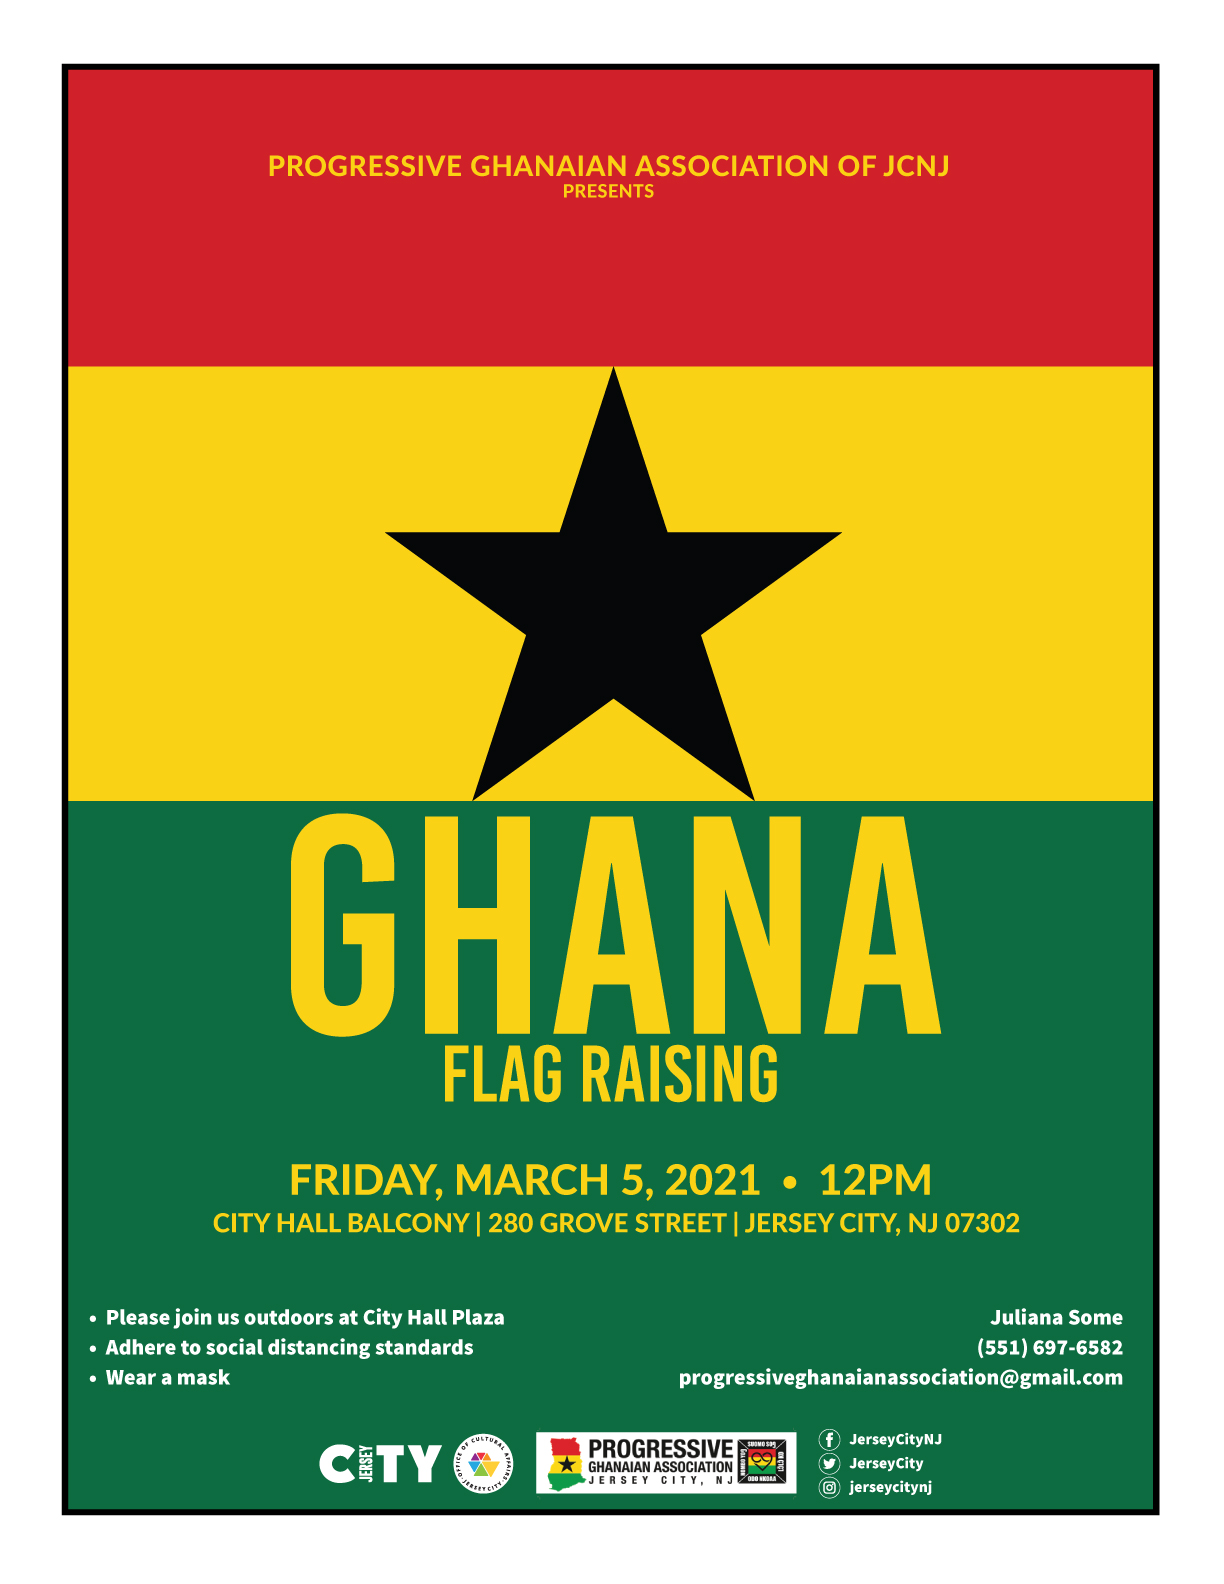 Ghana Flag raising Flyer. Backgriund is the flag. Horizontal stripes of Red, then yellow and then green. A black star is centered in the yellow. Wordage appears detailing event.